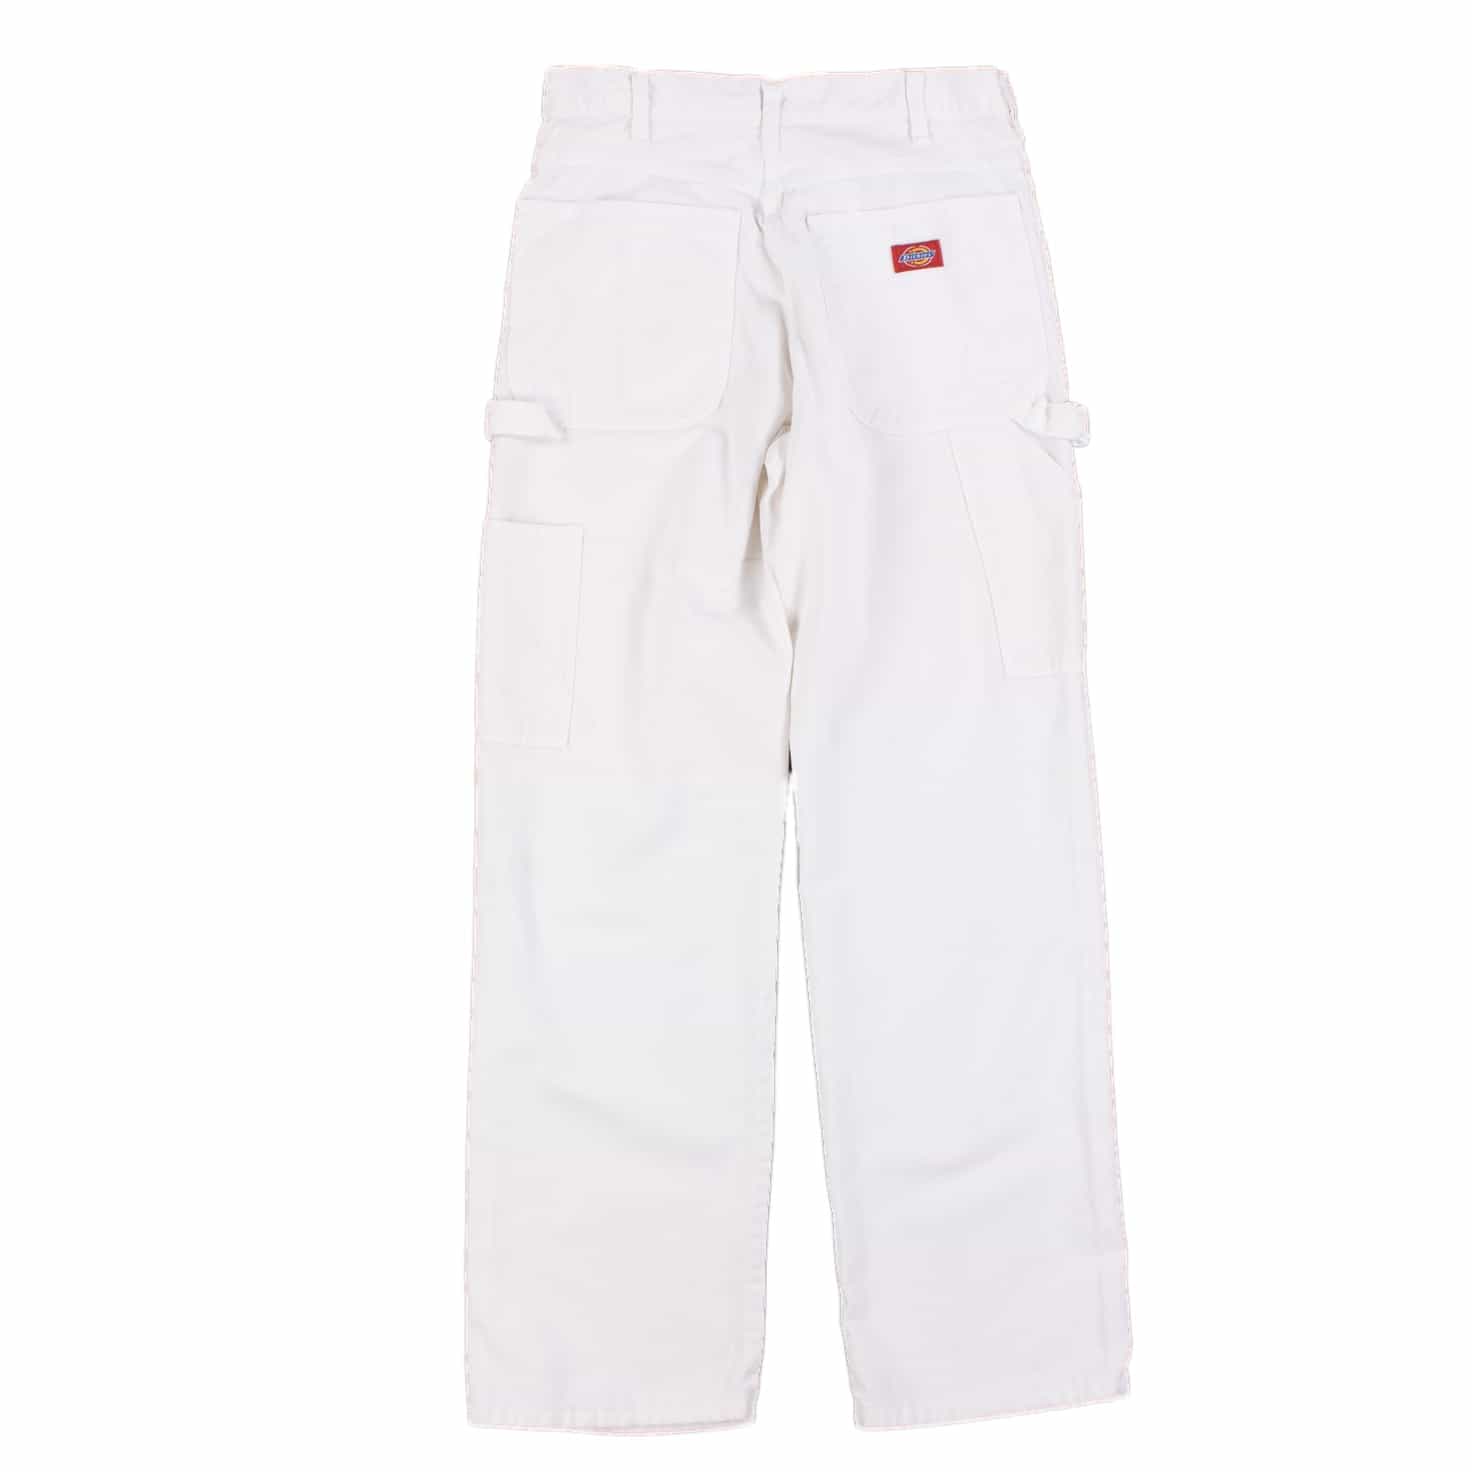 White Work Pants Dickies | escapeauthority.com